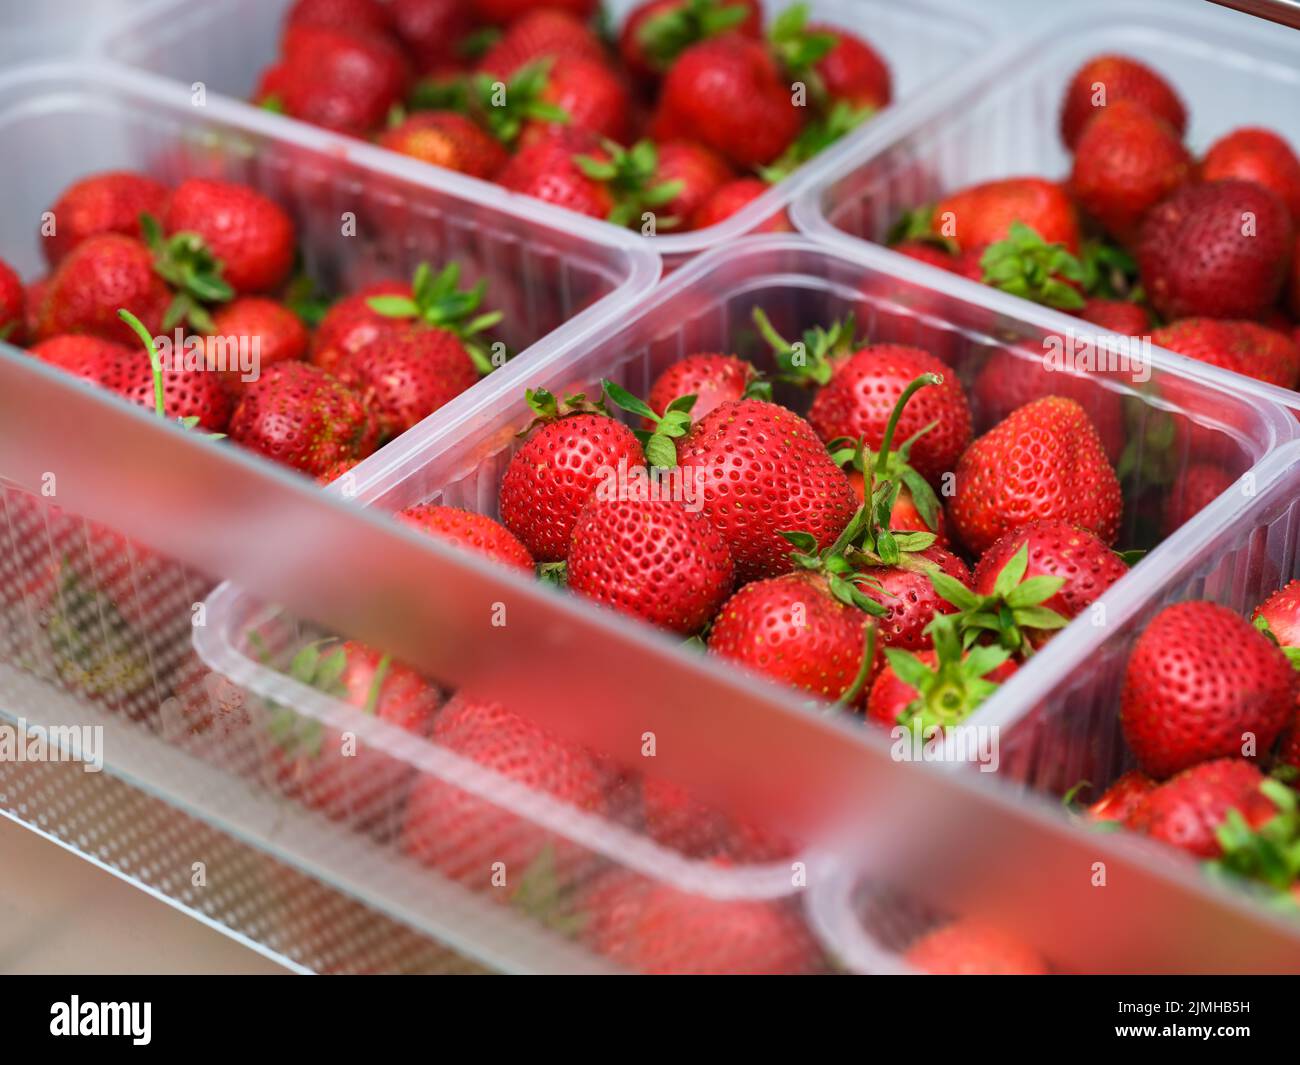 Plastic containers full of organic red strawberries in a fridge Stock Photo